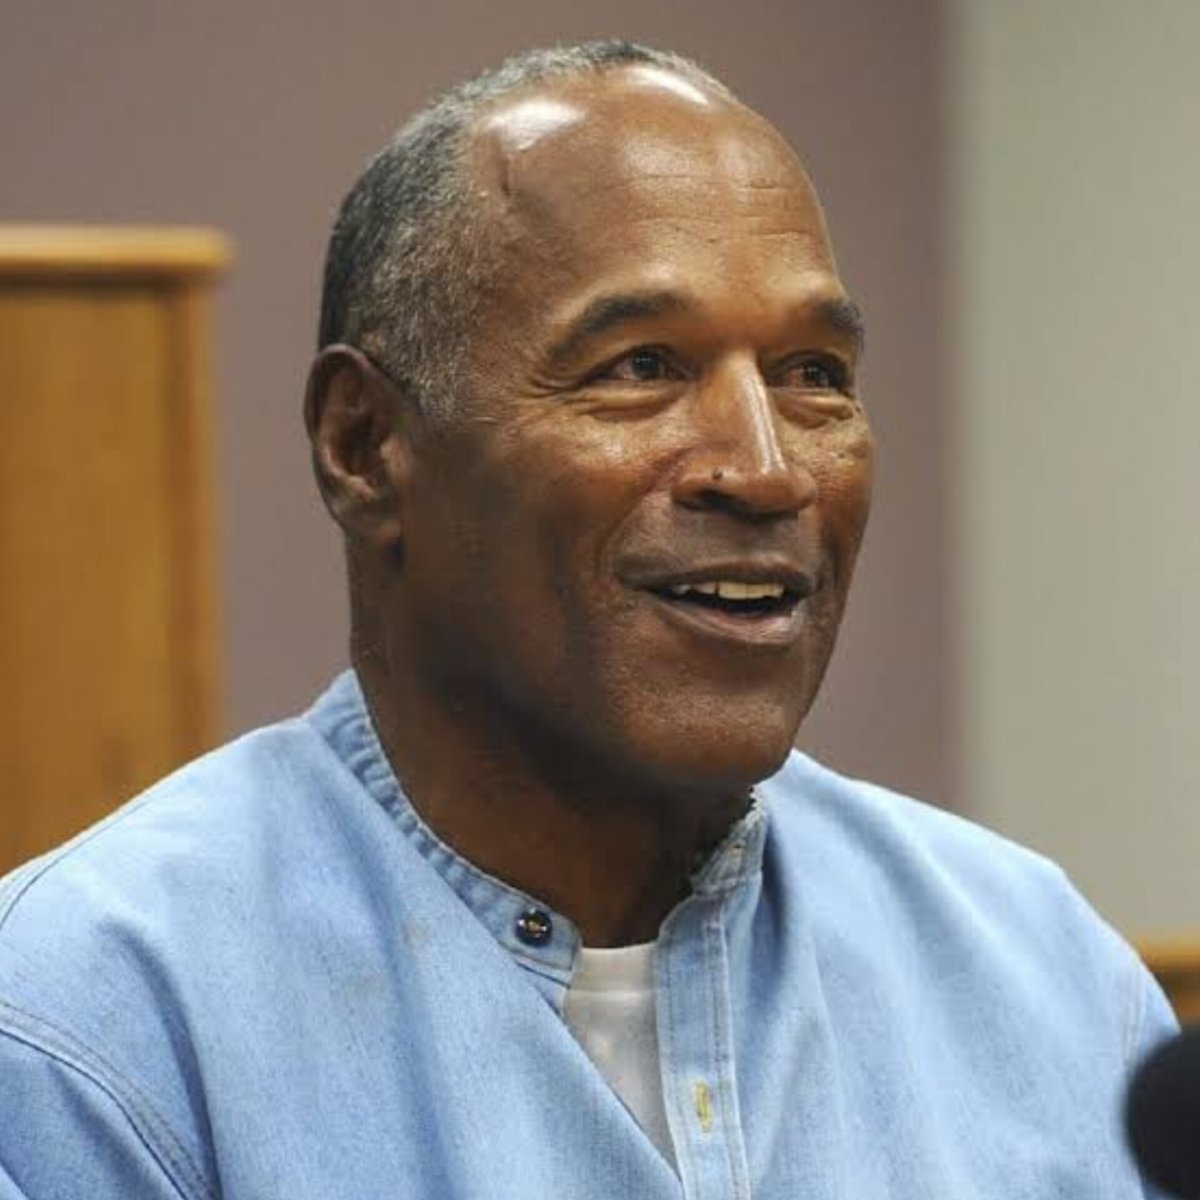 Former football star OJ Simpson, acquitted in the 'trial of the century,' has passed away at 76. His life was marked by fame, controversy, and legal battles.

Read more on shorts91.com/category/sports

 #OJSimpson #TrialOfTheCentury #RIP